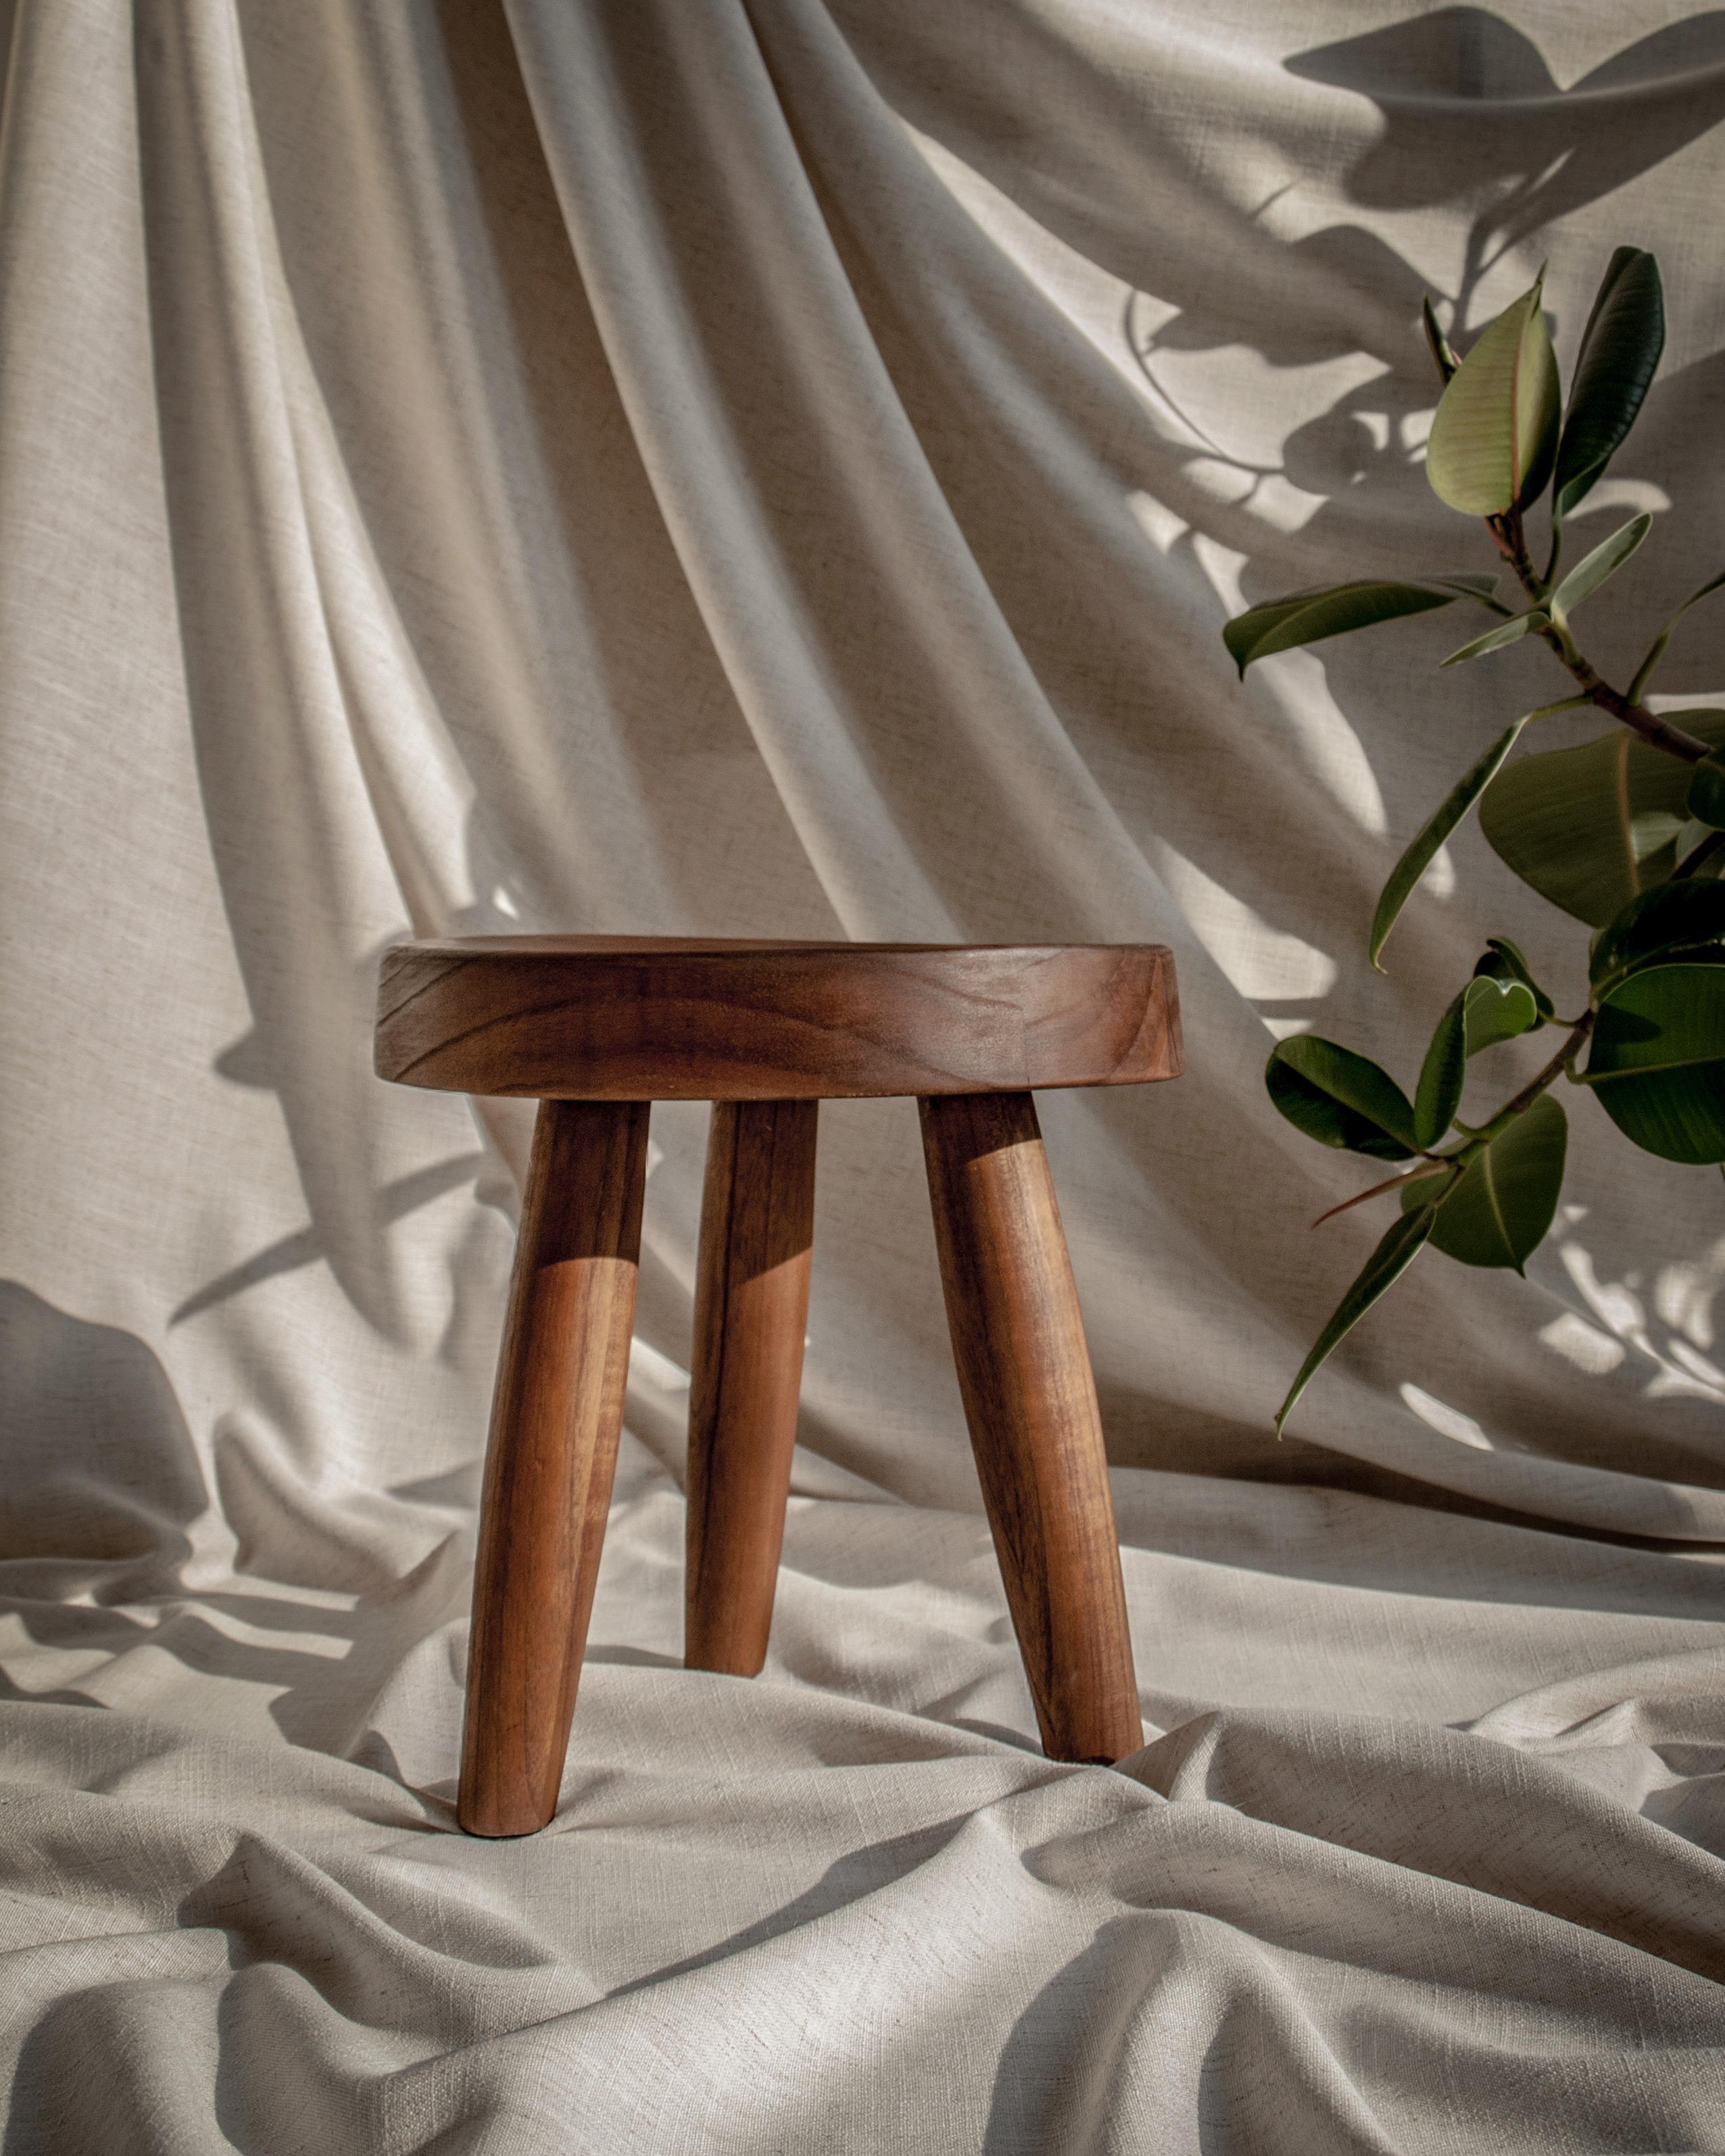 Brown milk stools by Bicci de' Medici Studio.
Dimensions: diameter 30 cm x height 40cm
Materials: Natural wood. Pigment.
Technique: Carved wood. Handmade. Oiled. Stained

Designer's biography: 

Bicci de’ Medici manufactures exclusive design